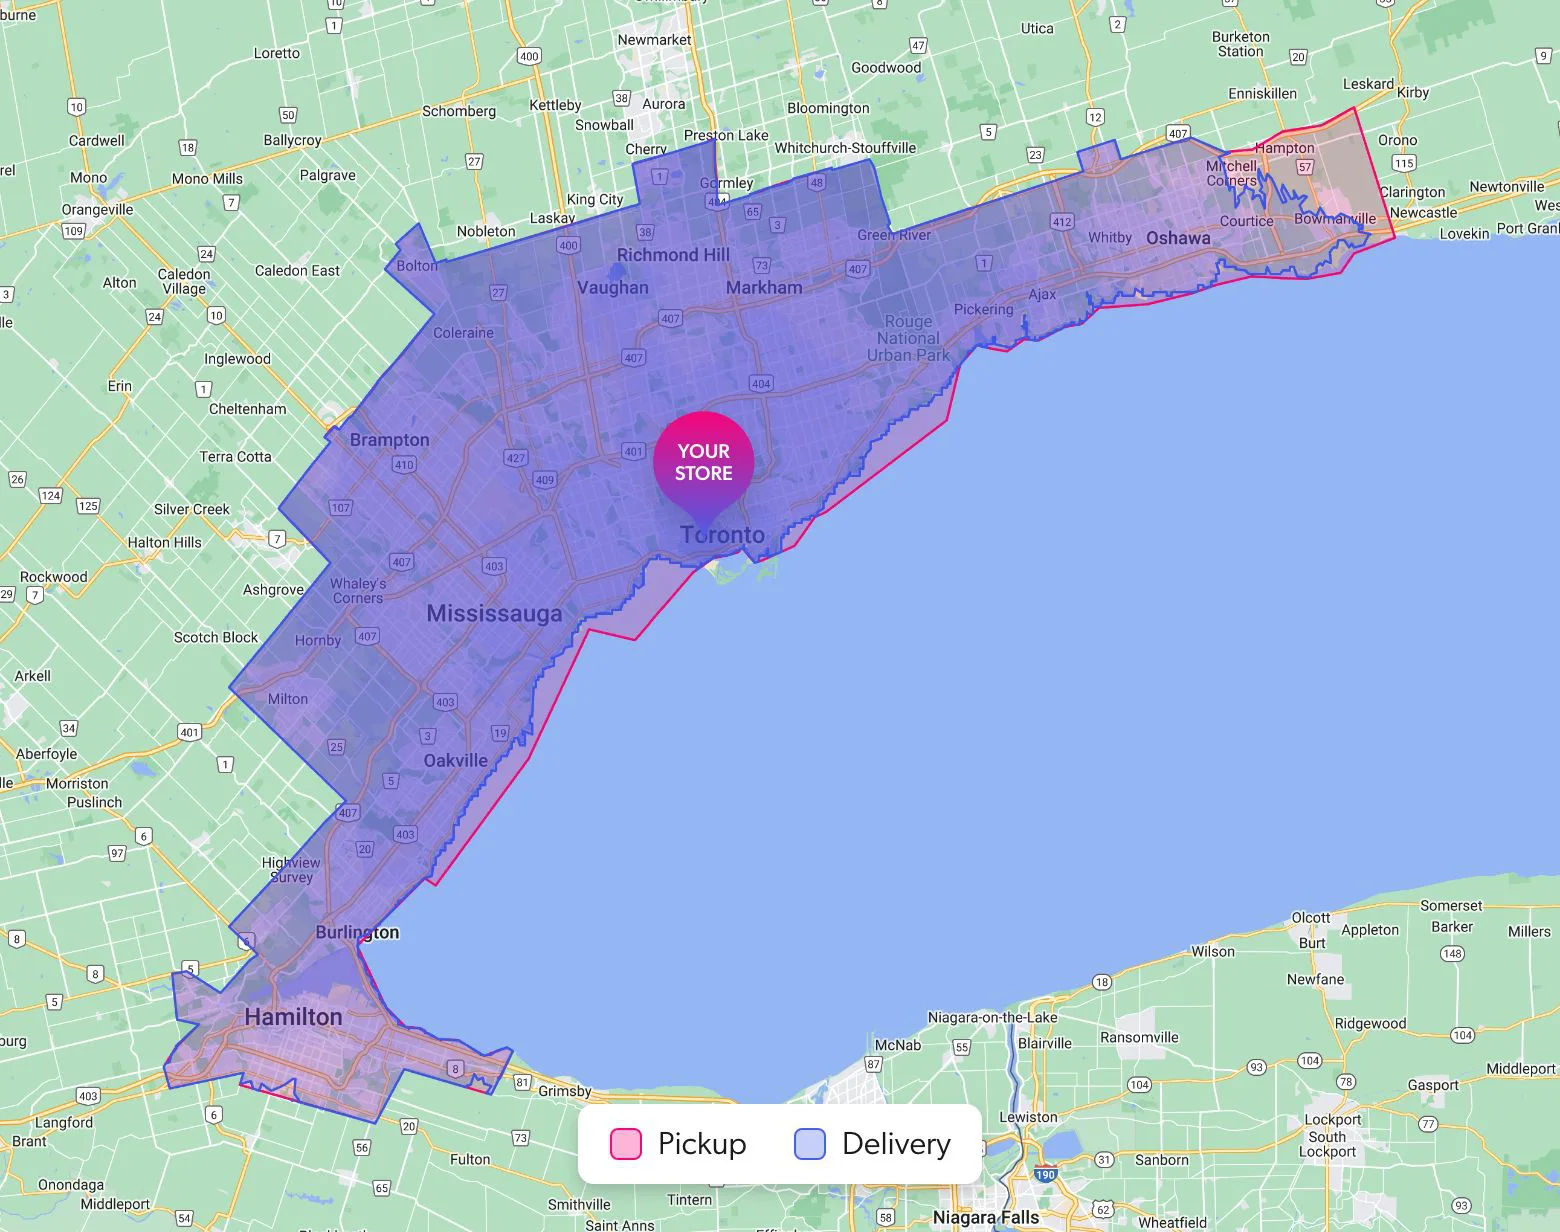 Toronto pickup and delivery zones